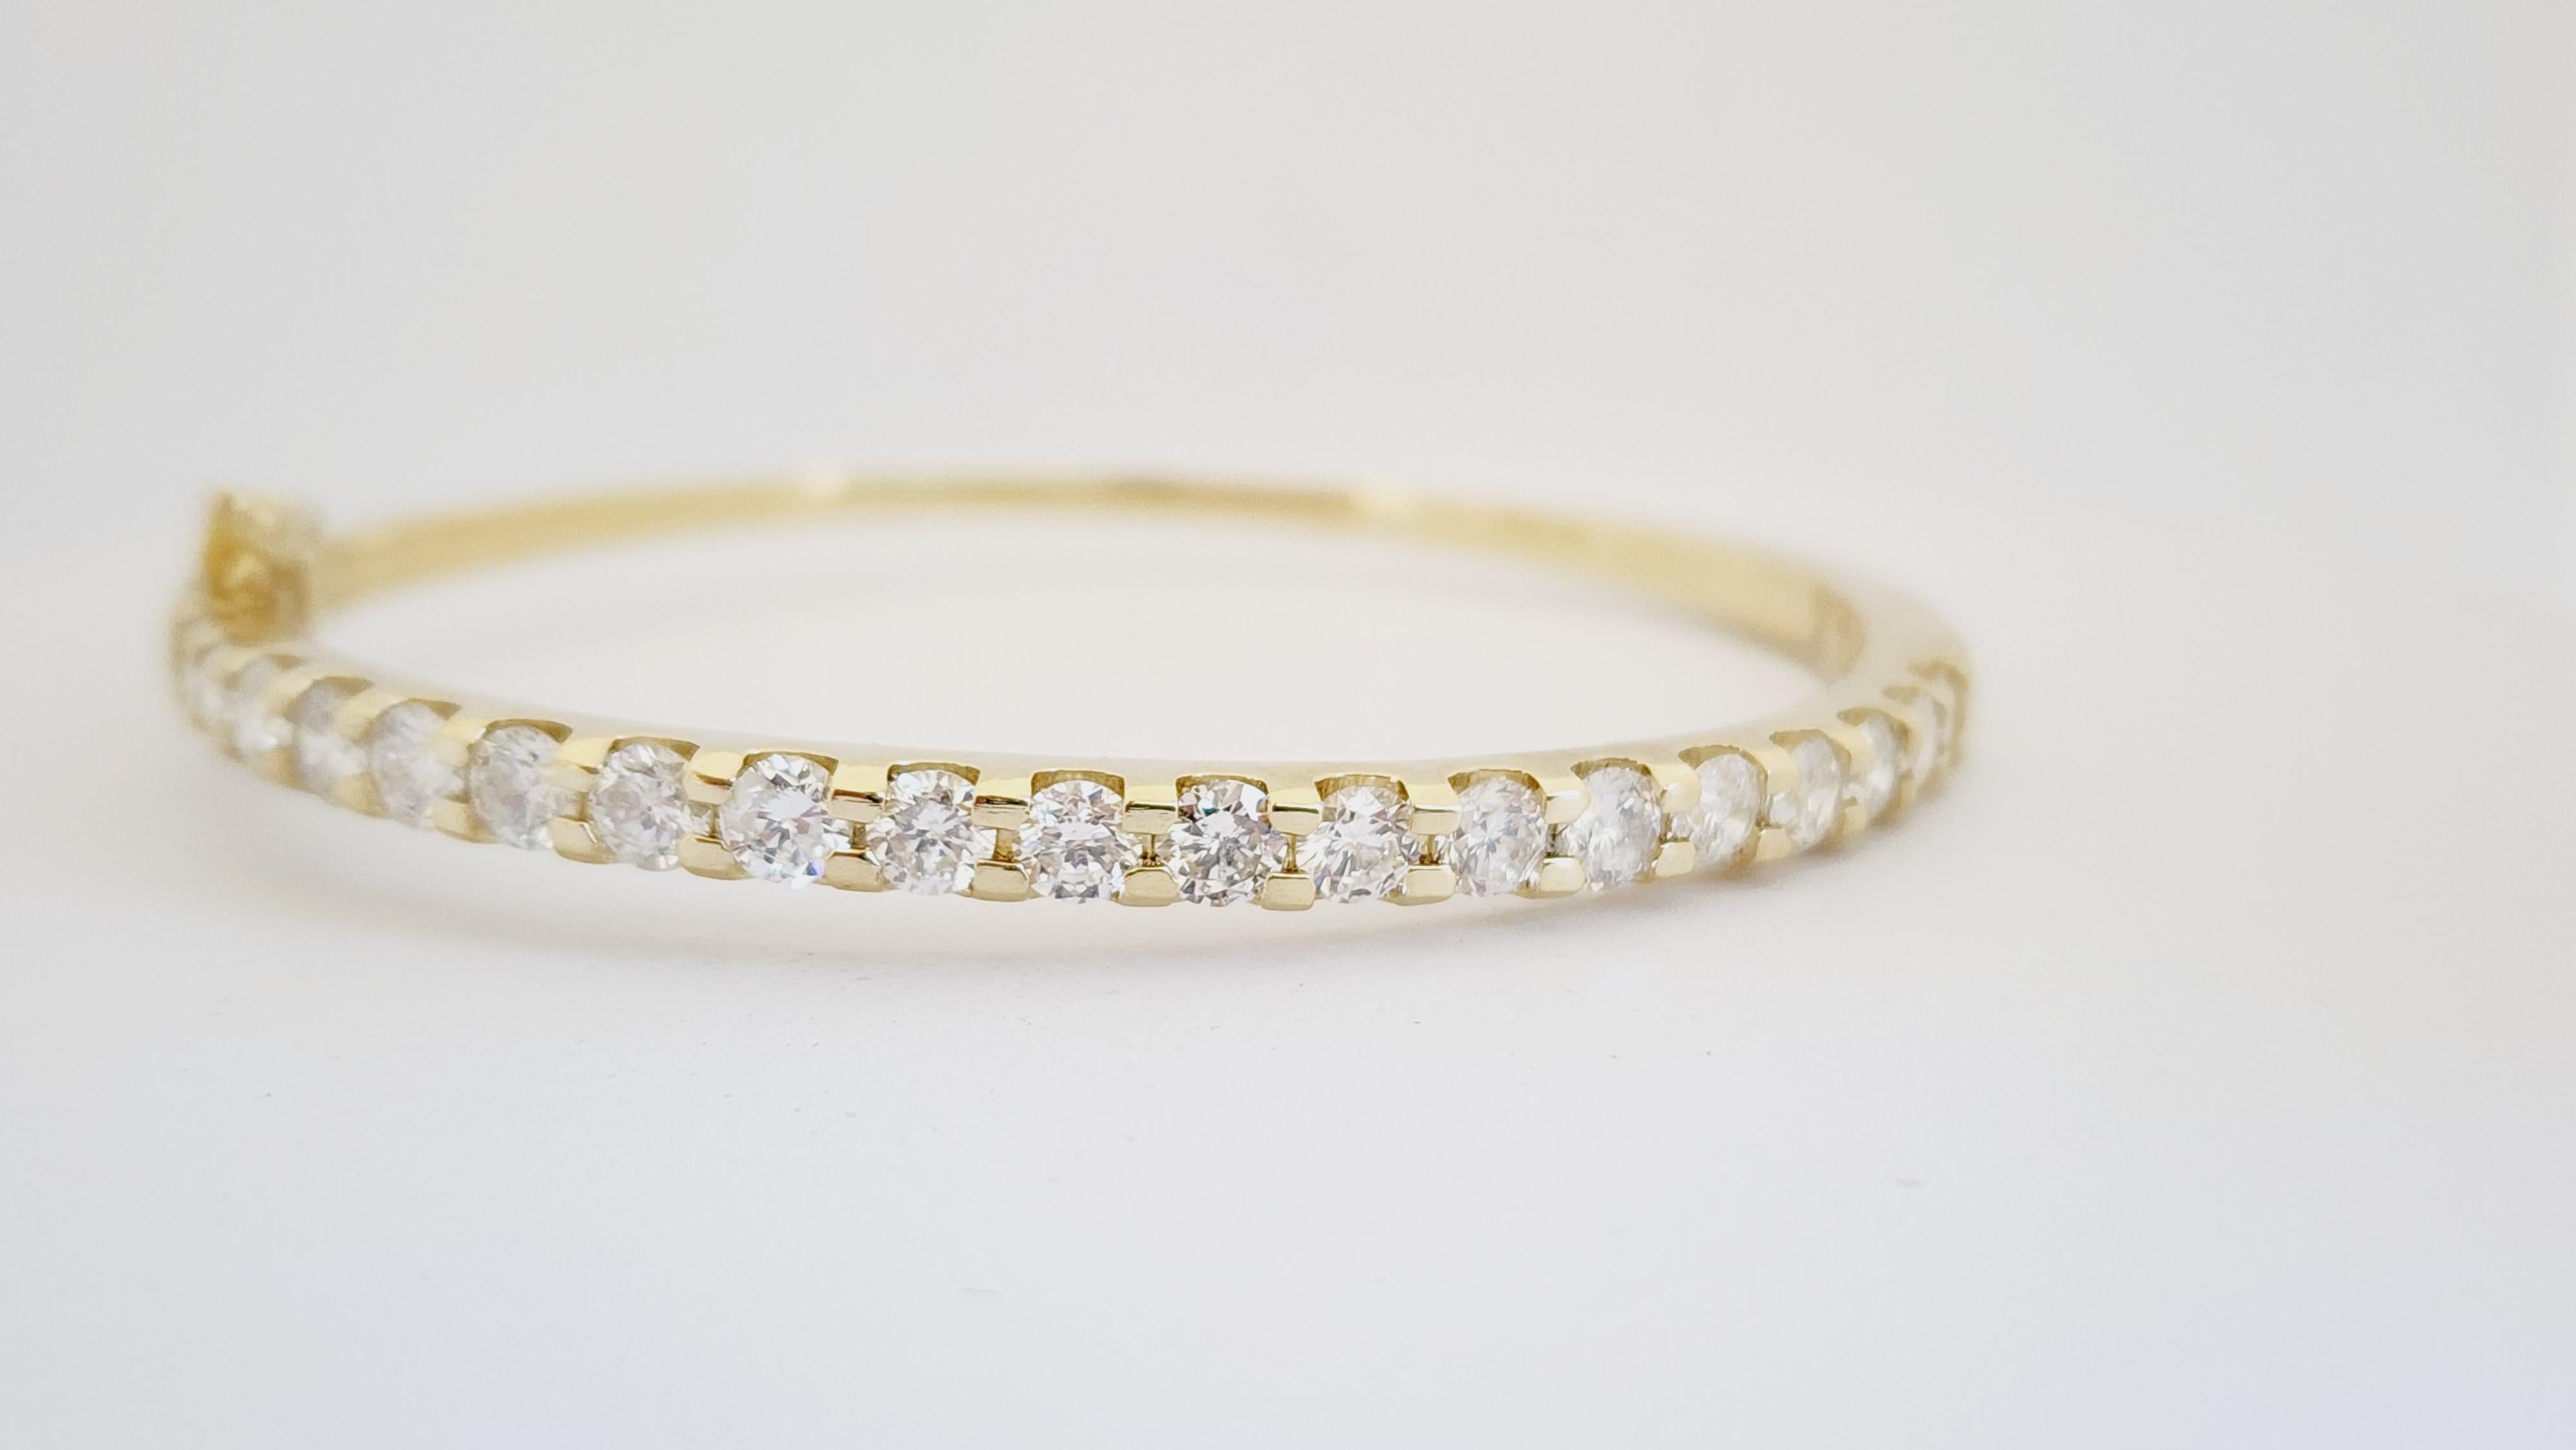 Natural Diamonds 3.88 ctw flexible half way around bangle yellow gold 14k 7 Inch. 
Average Color G Clarity I, 3.8 mm wide.

*Free shipping within the U.S.*